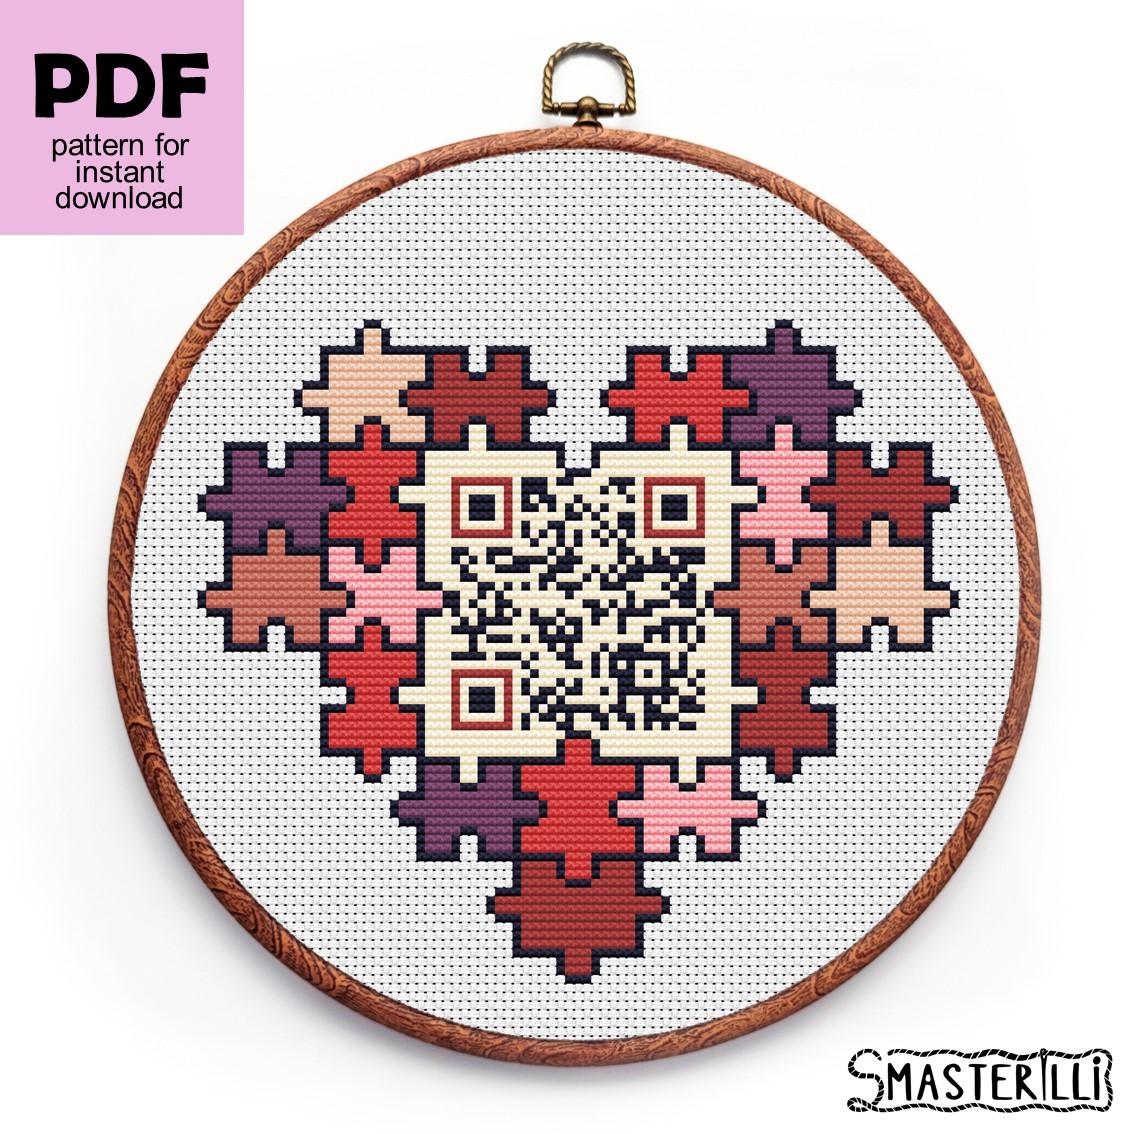 Heart cross stitch pattern with QR code , I love you phrase for Valentine's day gift by Smasterilli. Digital cross stitch pattern for instant download.